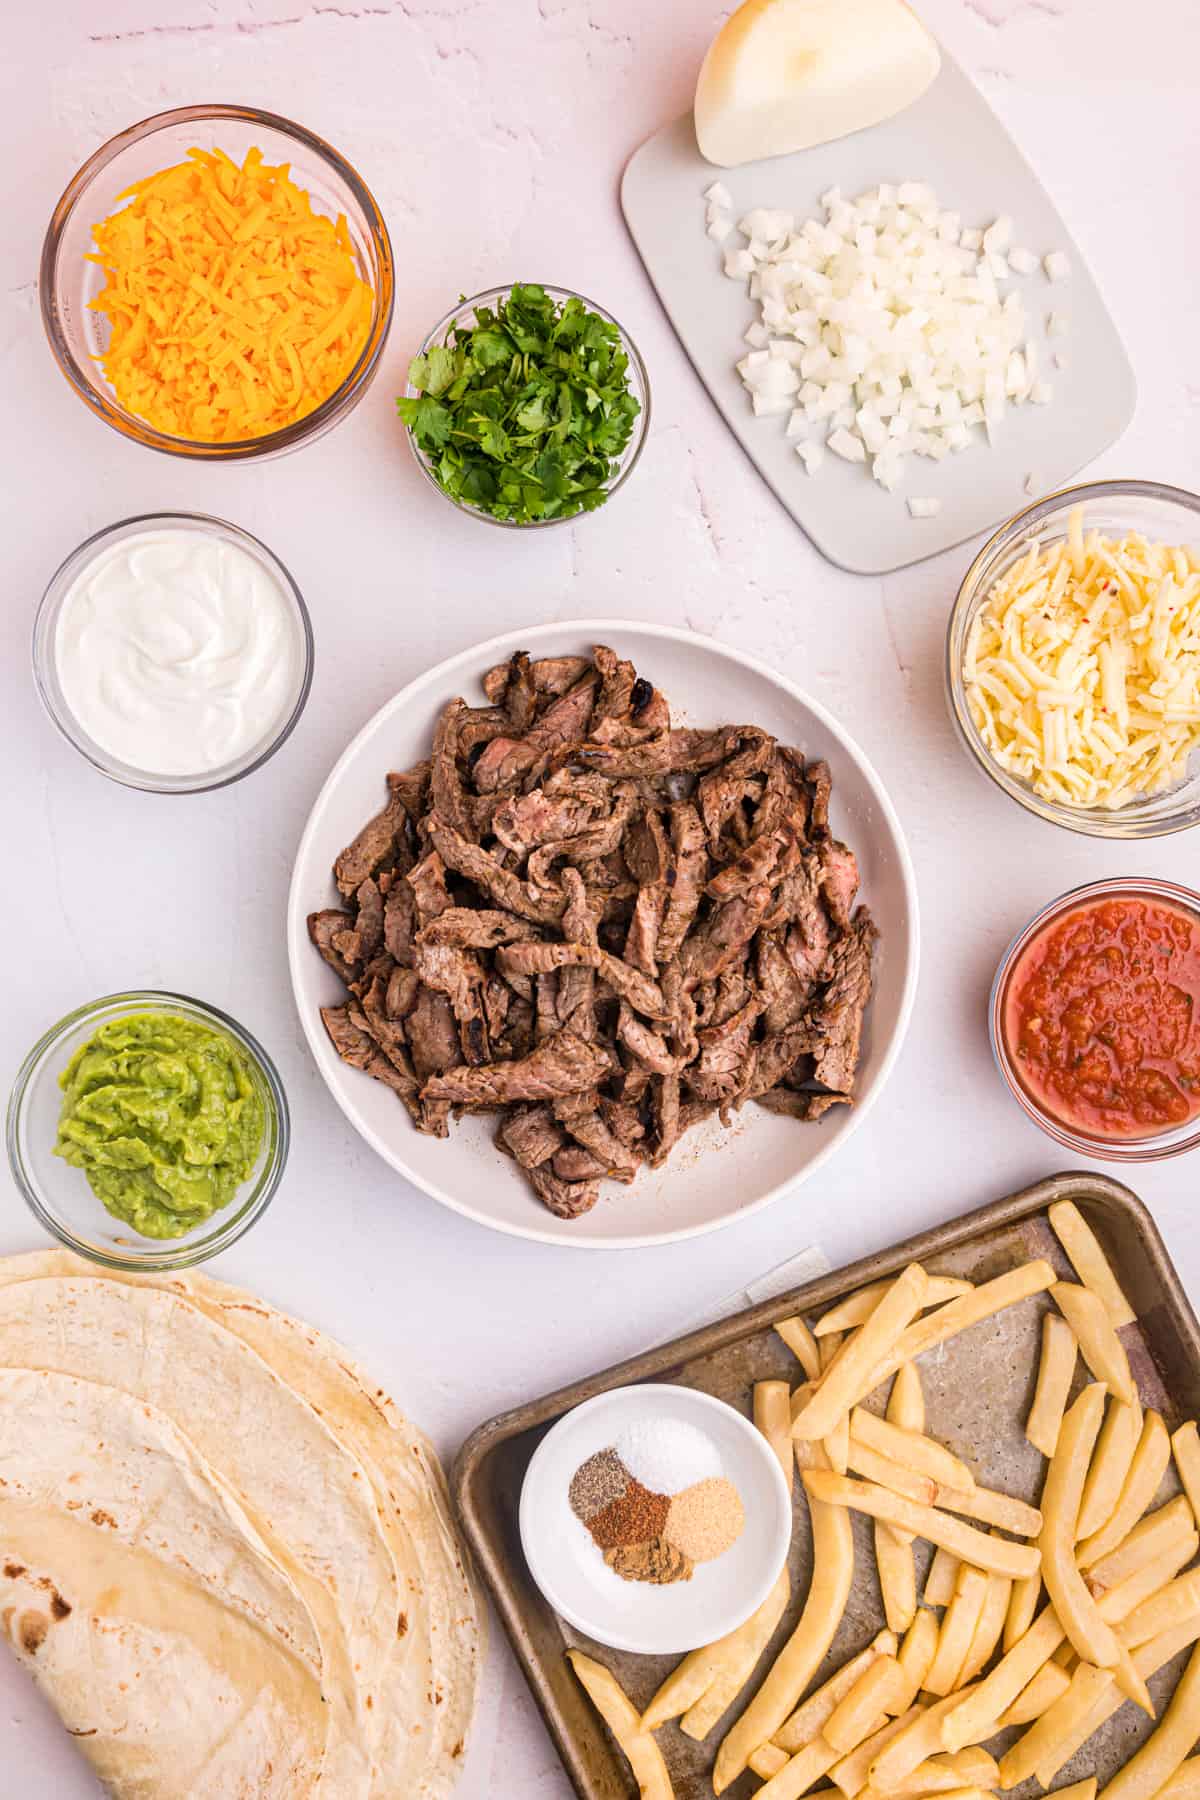 The ingredients for a california burrito are placed on a white countertop.